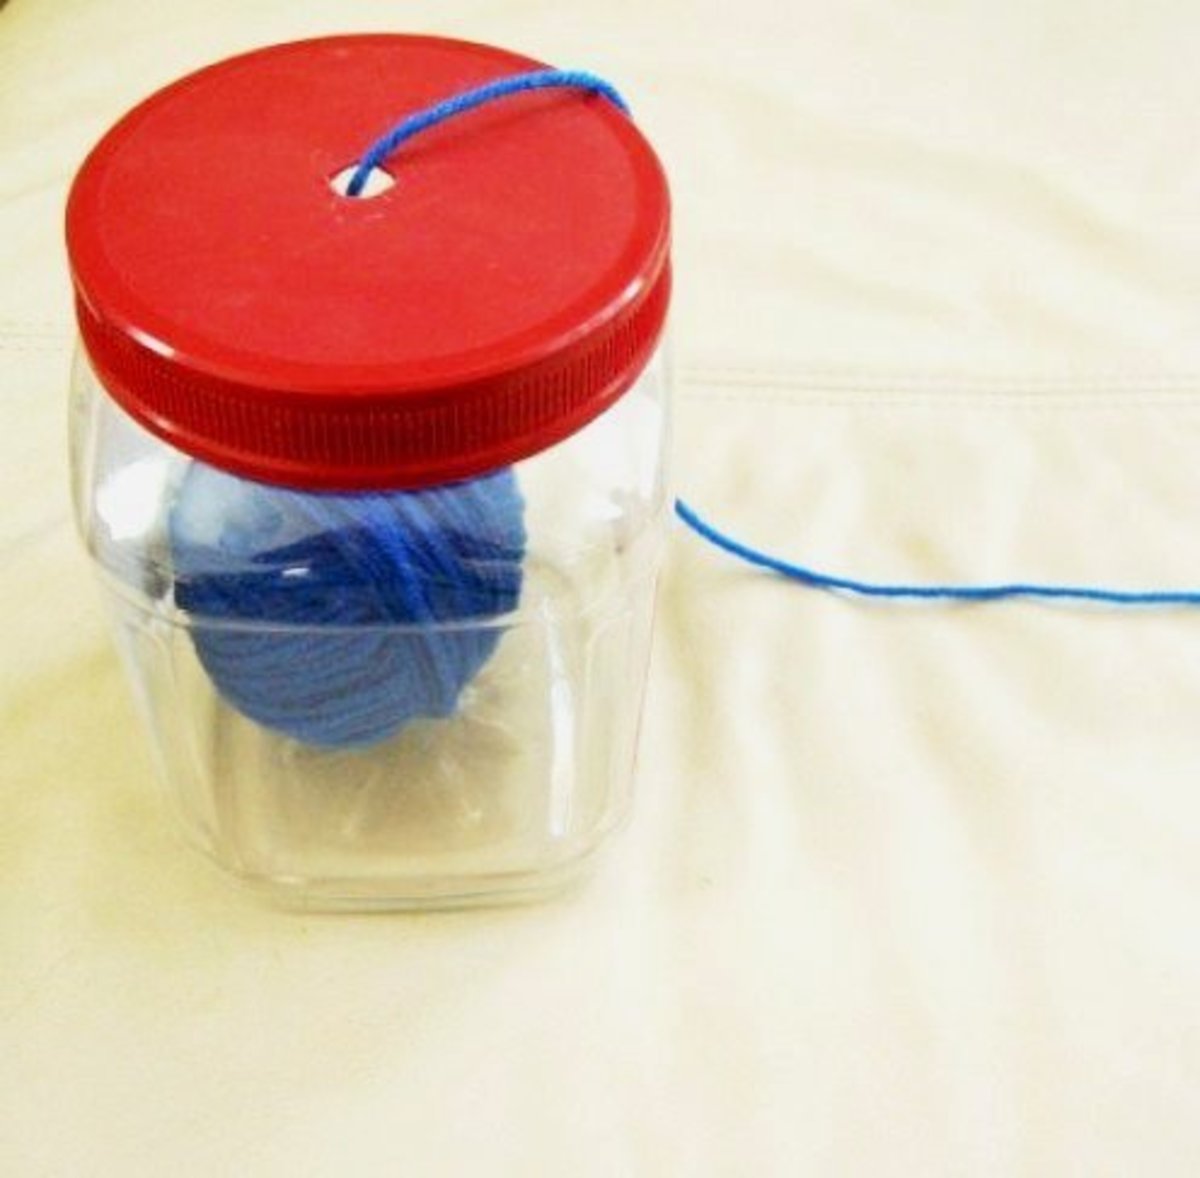 This functional yarn holder is made from a sturdy plastic container.